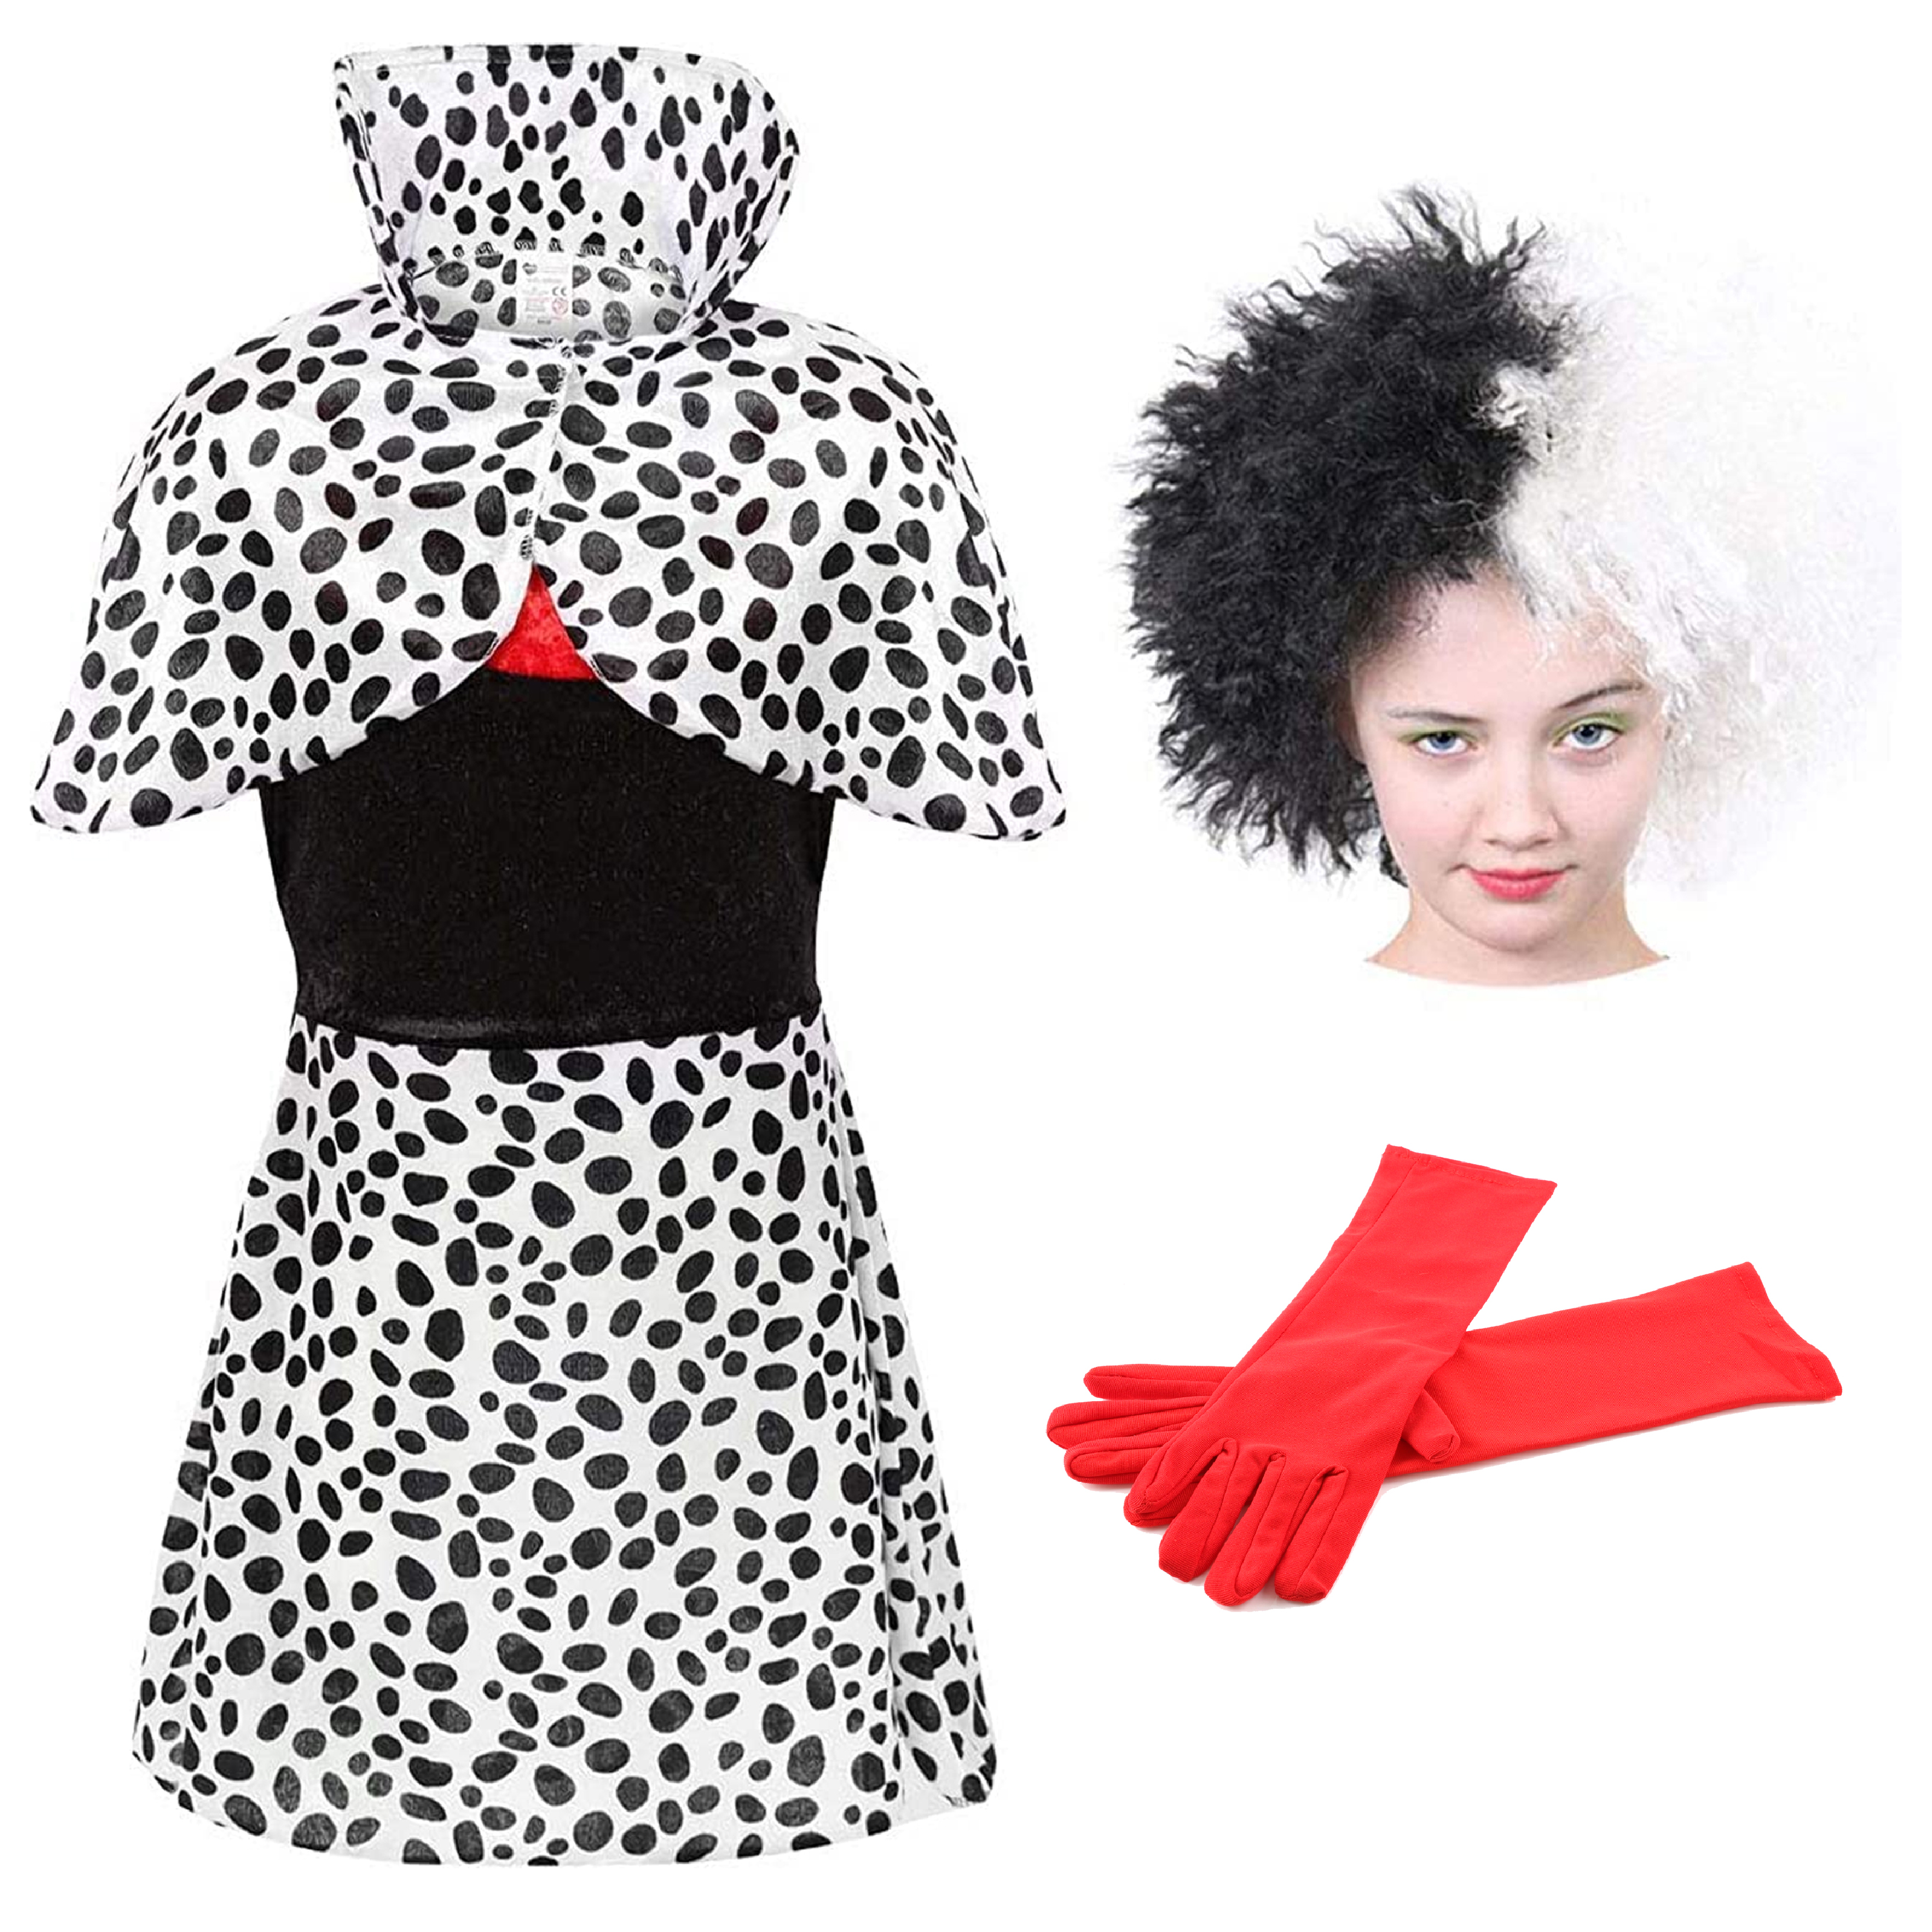 LONG BLACK DRESS EVIL DOG LADY FANCY DRESS COSTUME HALF BLACK HALF WHITE WIG CHARACTERS SIZE: X-SMALL UK 6-8 DOG LADY CAPE PERFECT FOR HALLOWEEN 